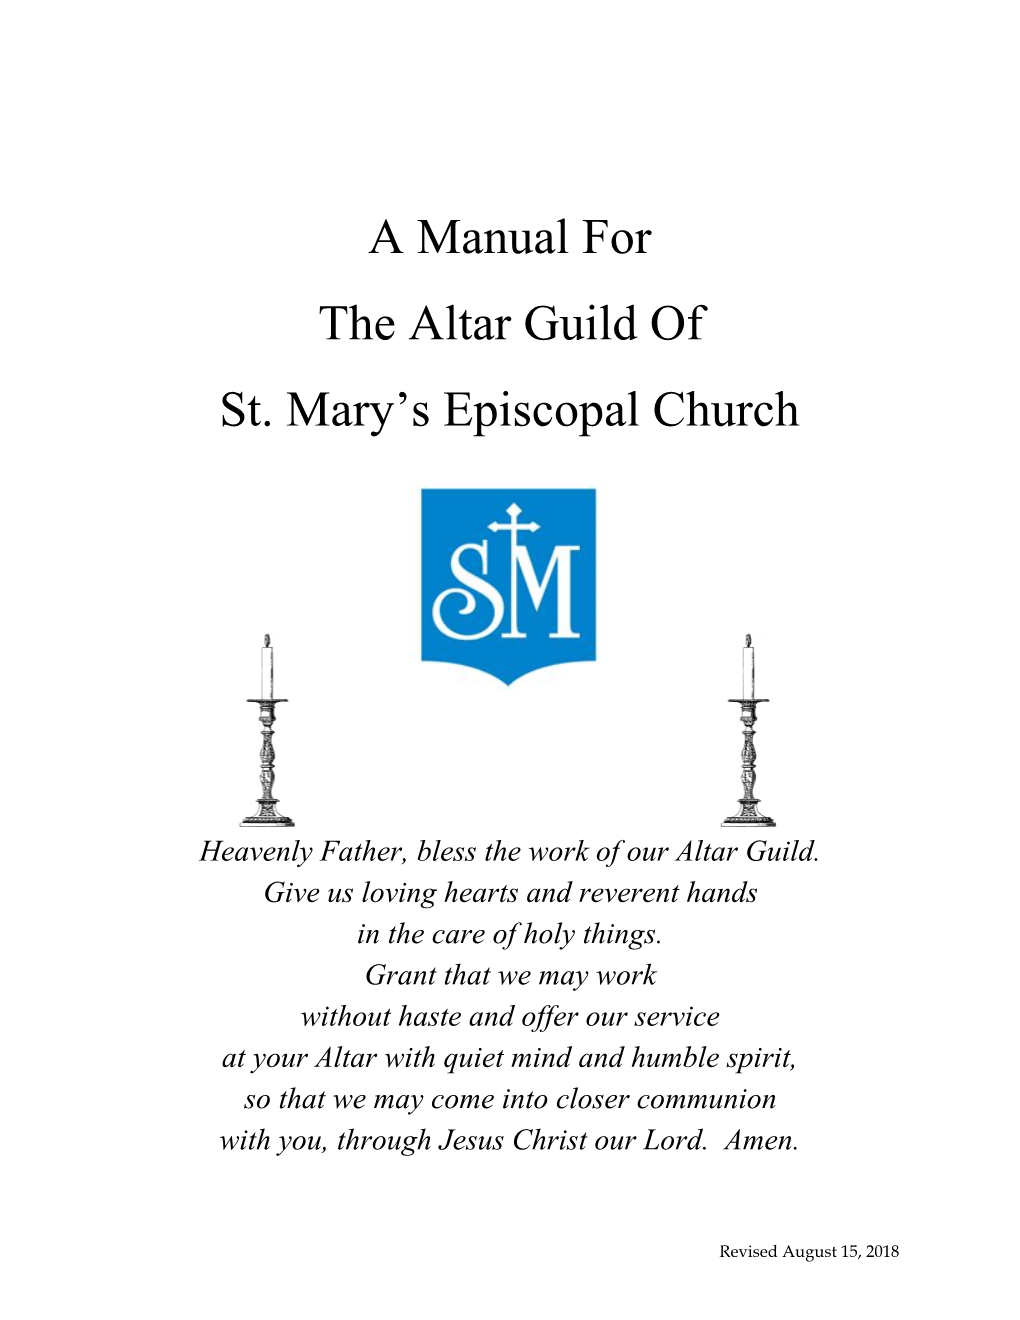 A Manual for the Altar Guild of St. Mary's Episcopal Church